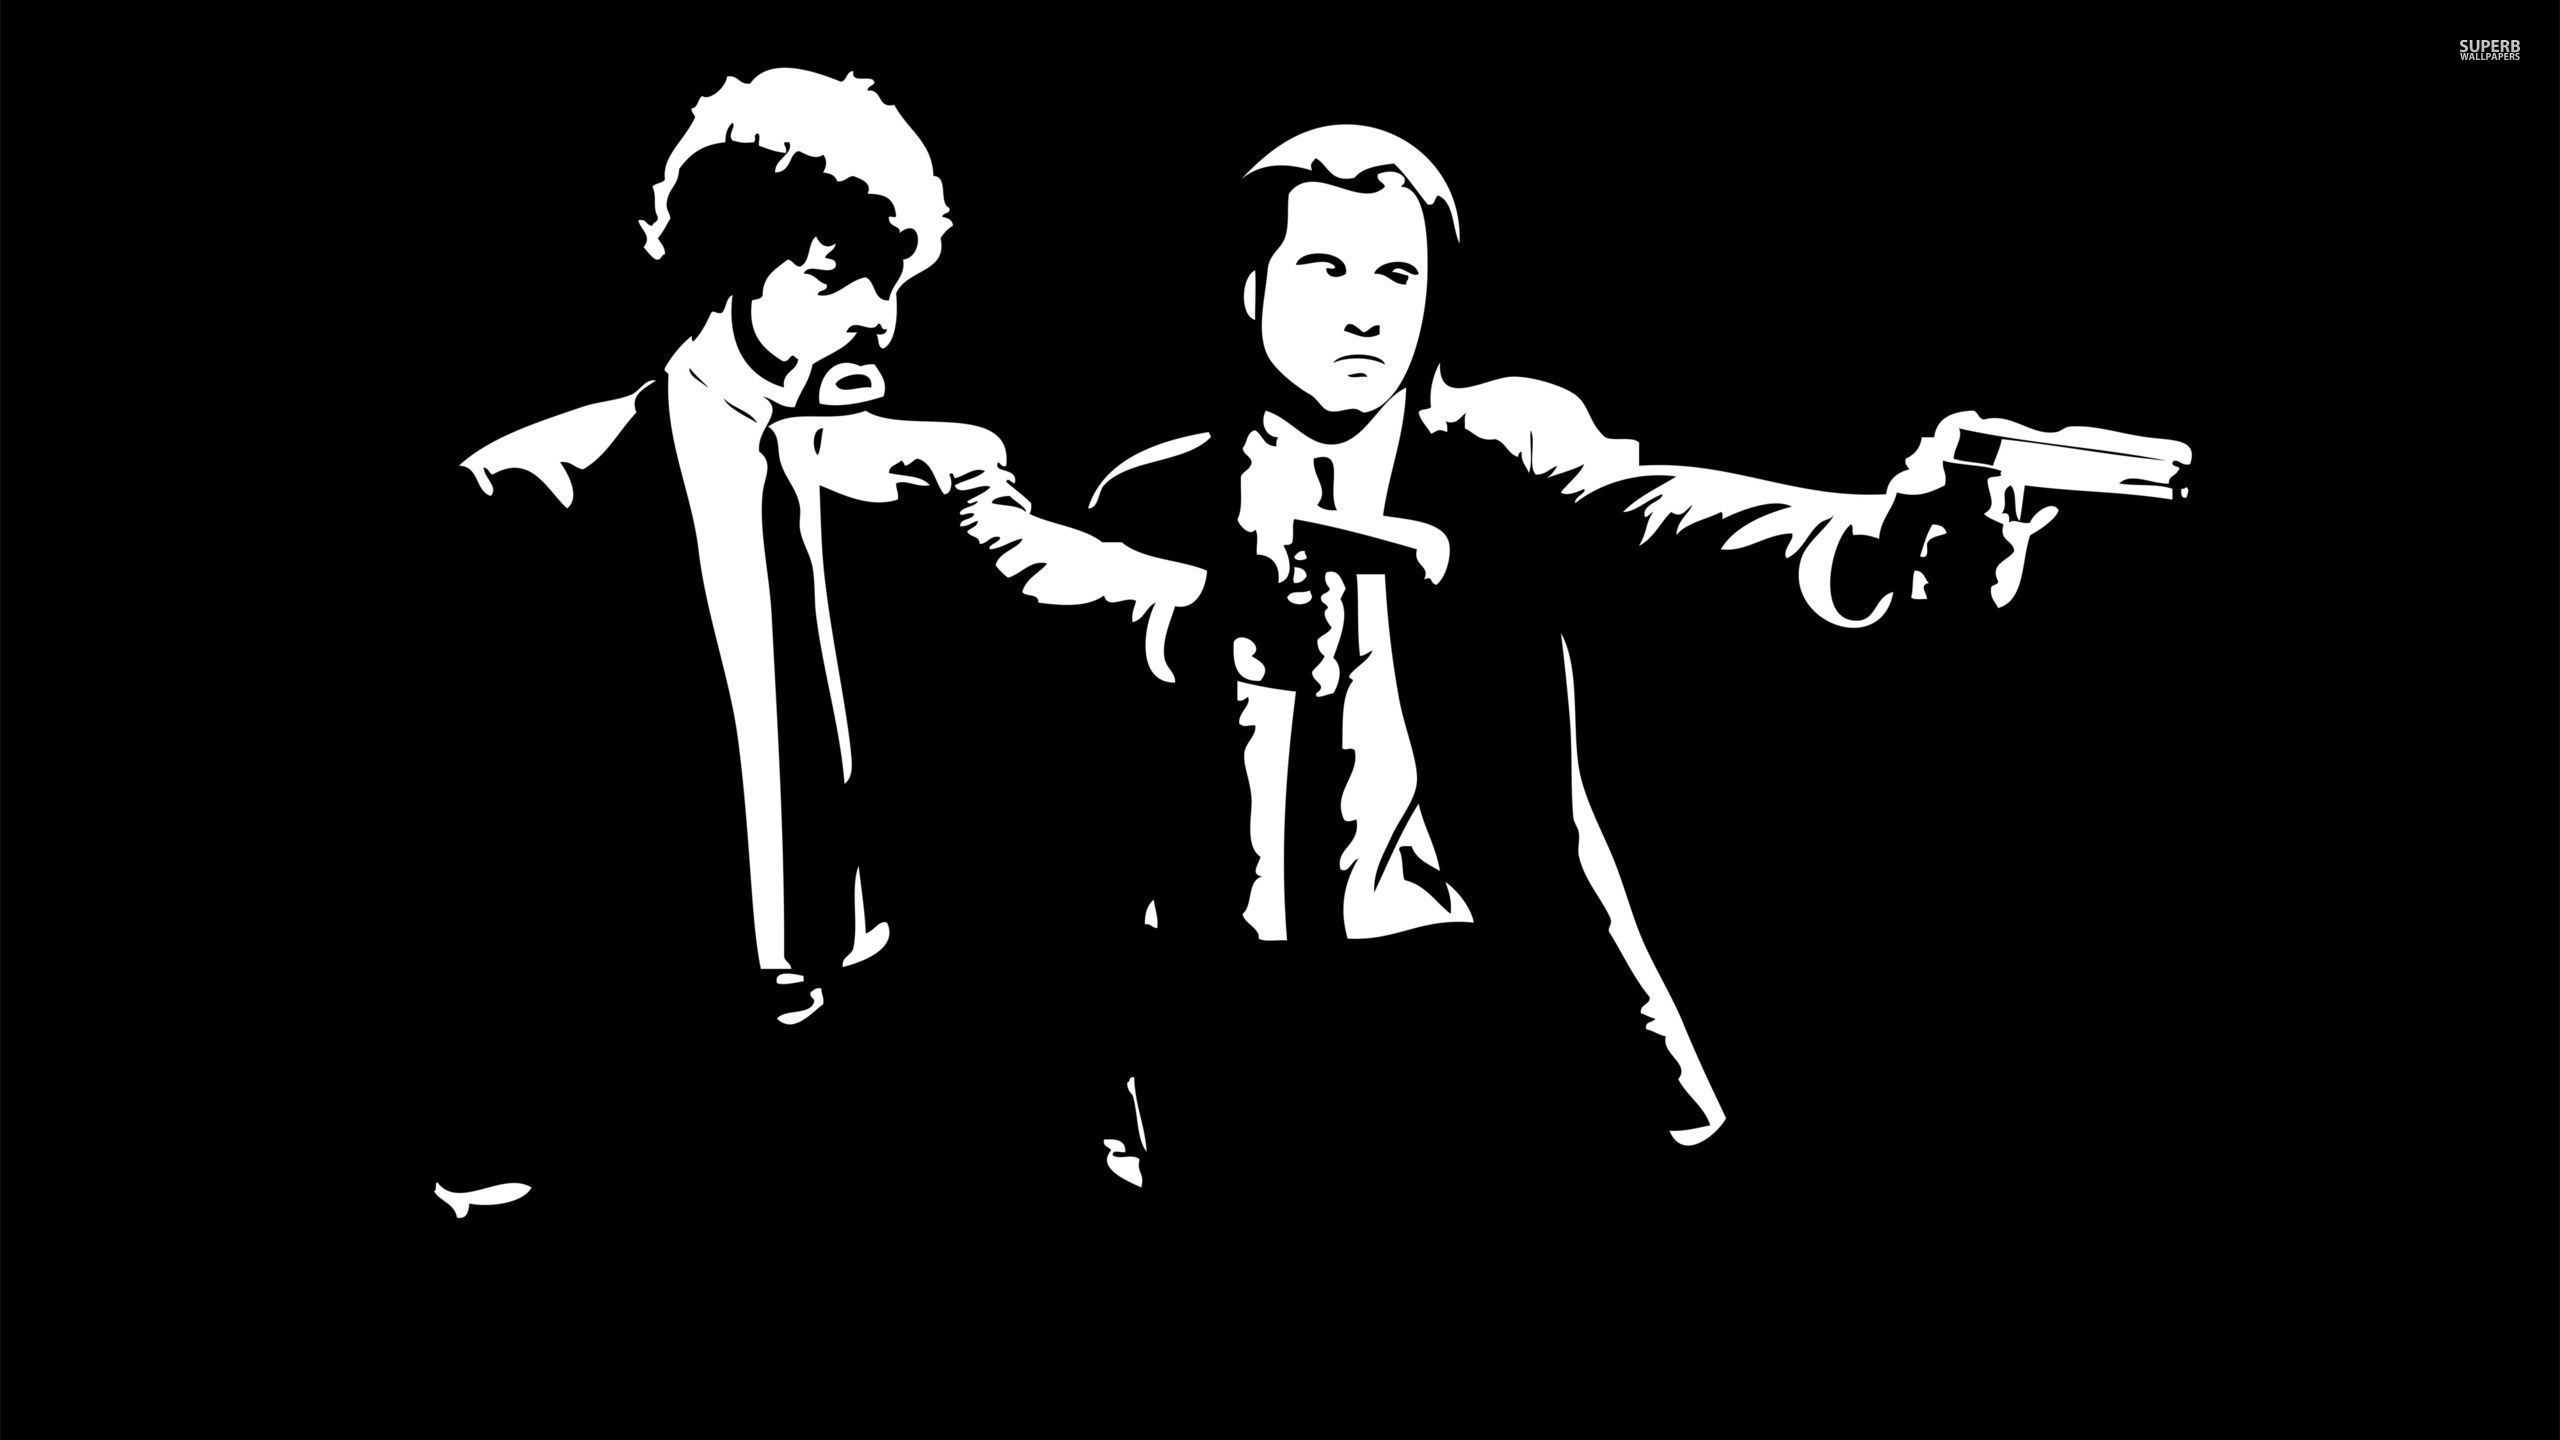 Pulp Fiction wallpaper - Movie wallpapers -